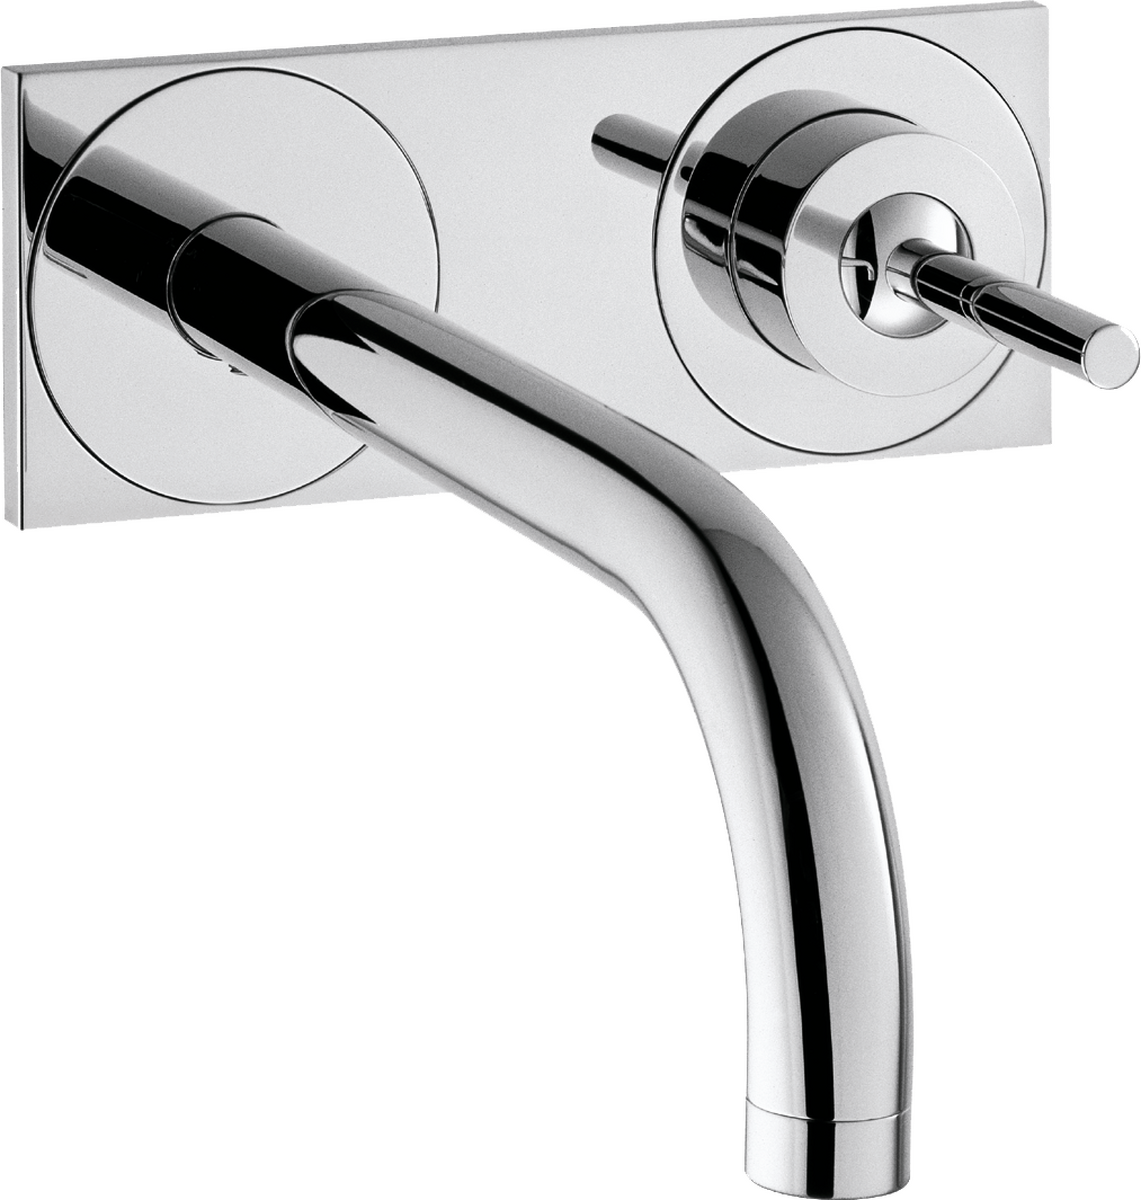 Direct Oude tijden kaas AXOR Washbasin mixers: AXOR Uno, Single lever basin mixer for concealed  installation wall-mounted with spout 225 mm and plate, Item No. 38115000 |  AXOR INT